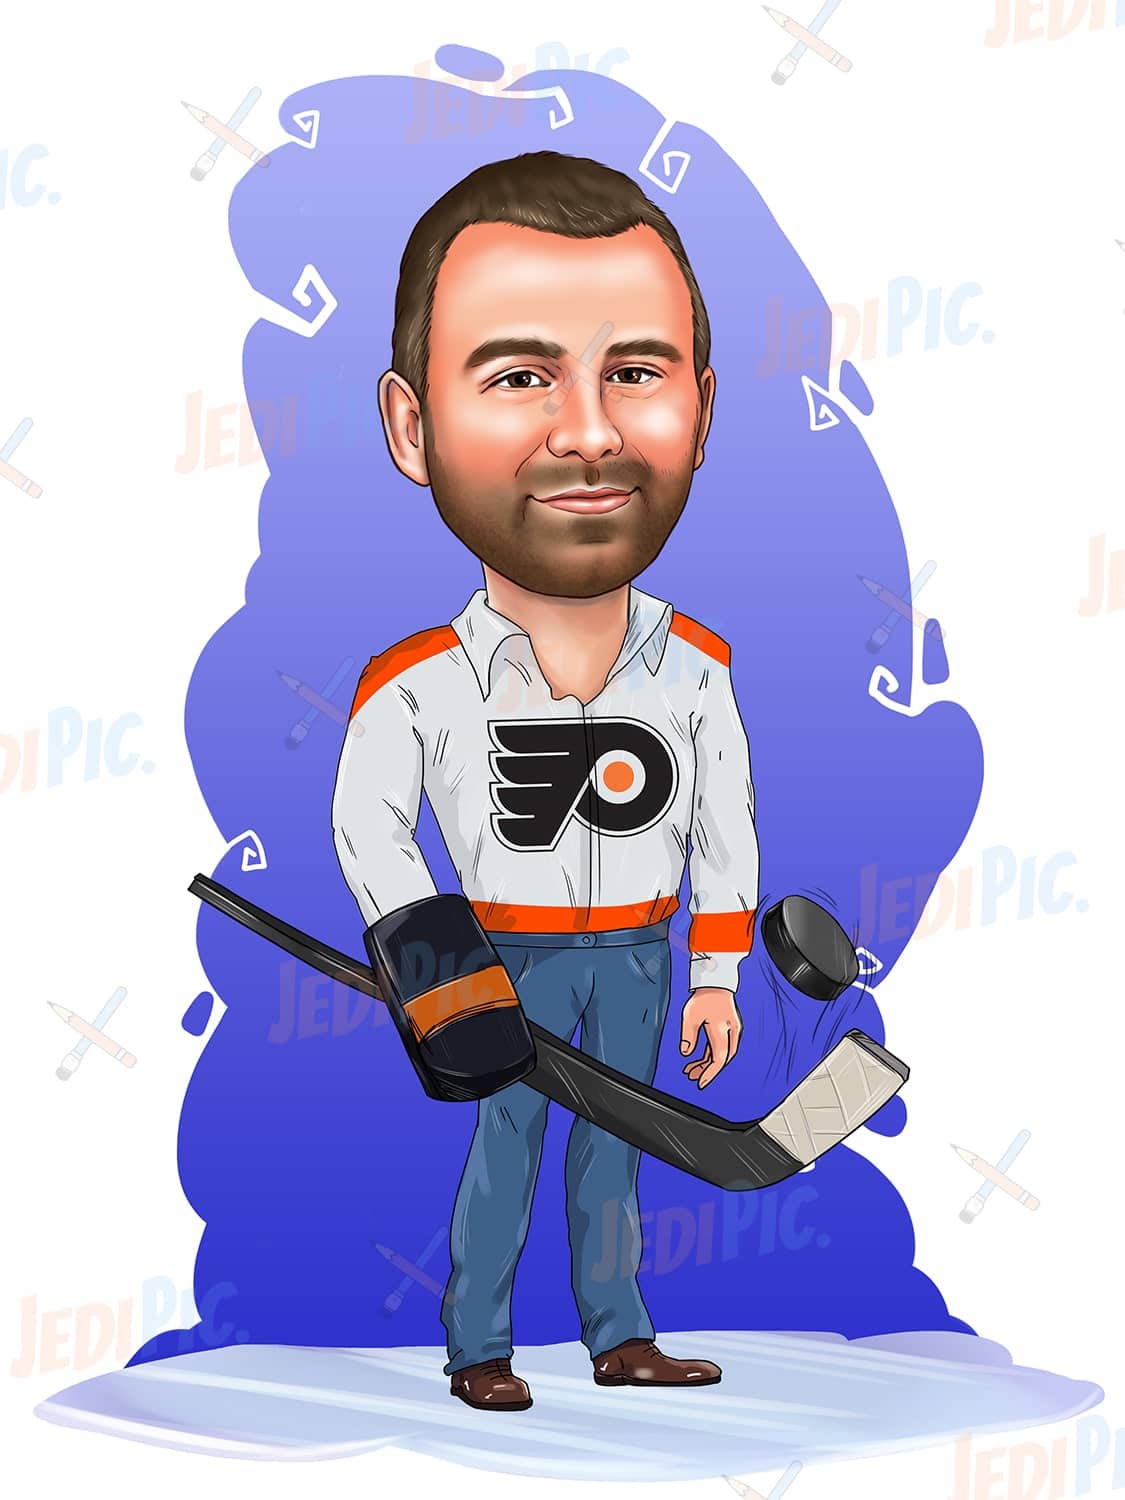 Hockey Player Caricature in Color Style